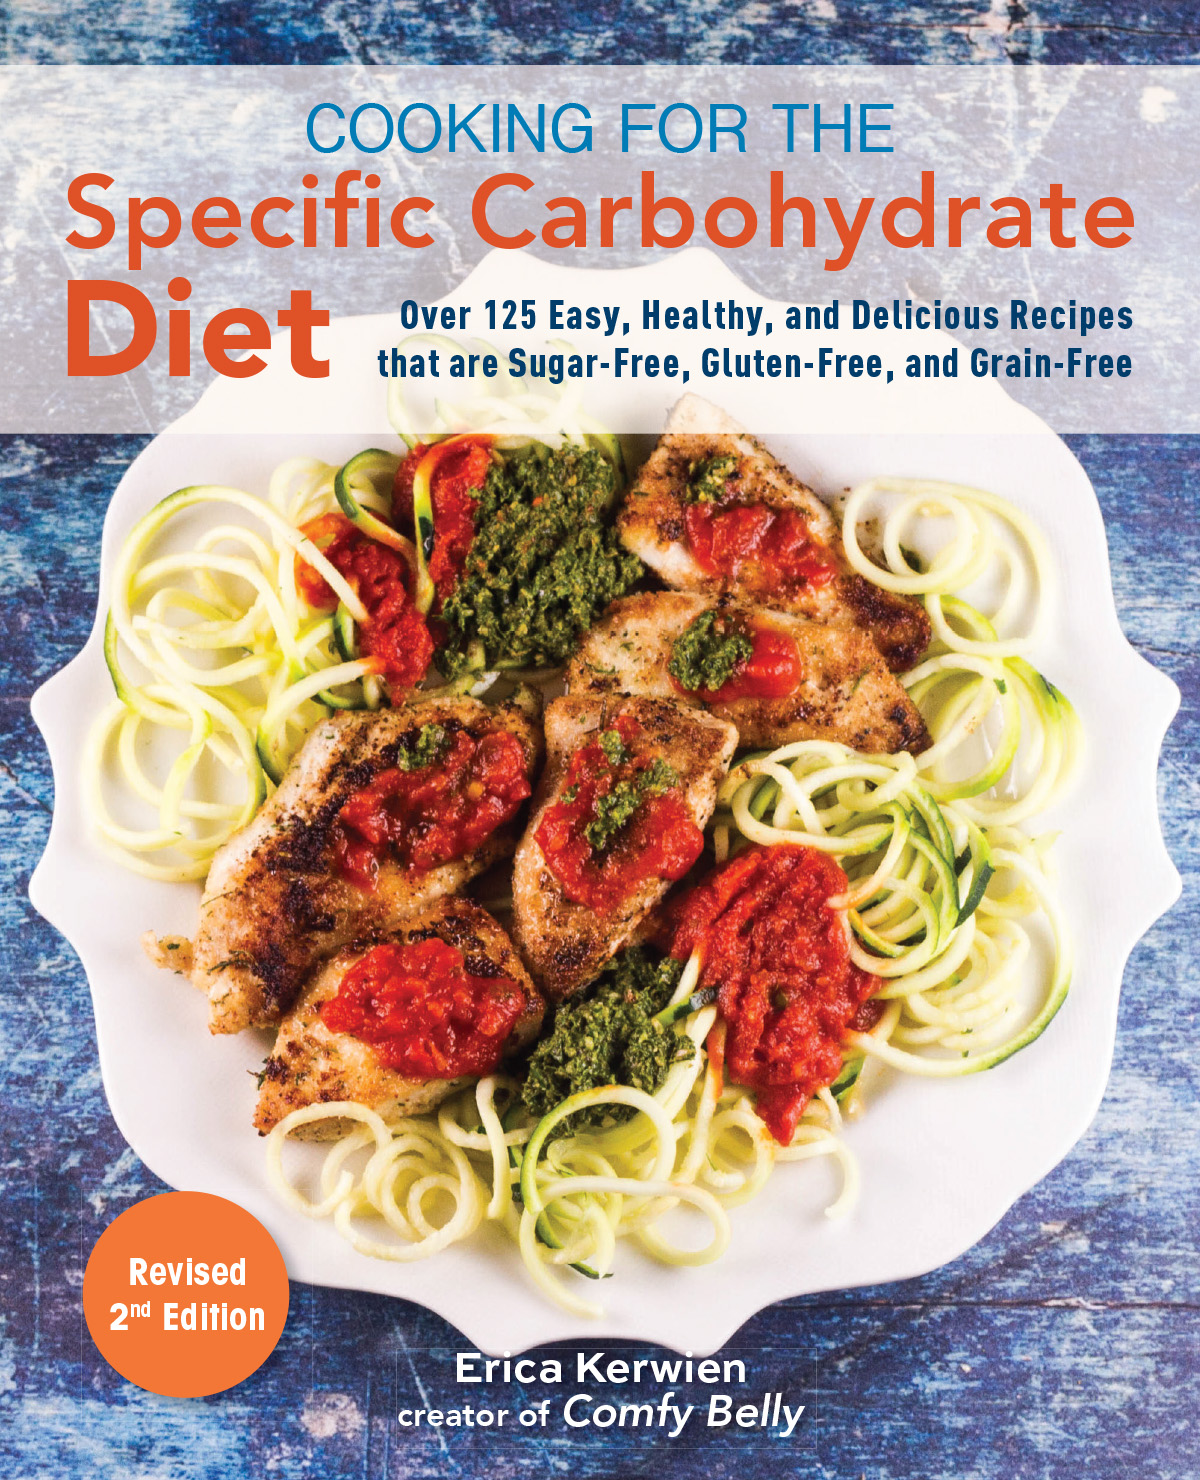 Specific Carbohydrate Diet by Erica Kerwien - Comfy Belly